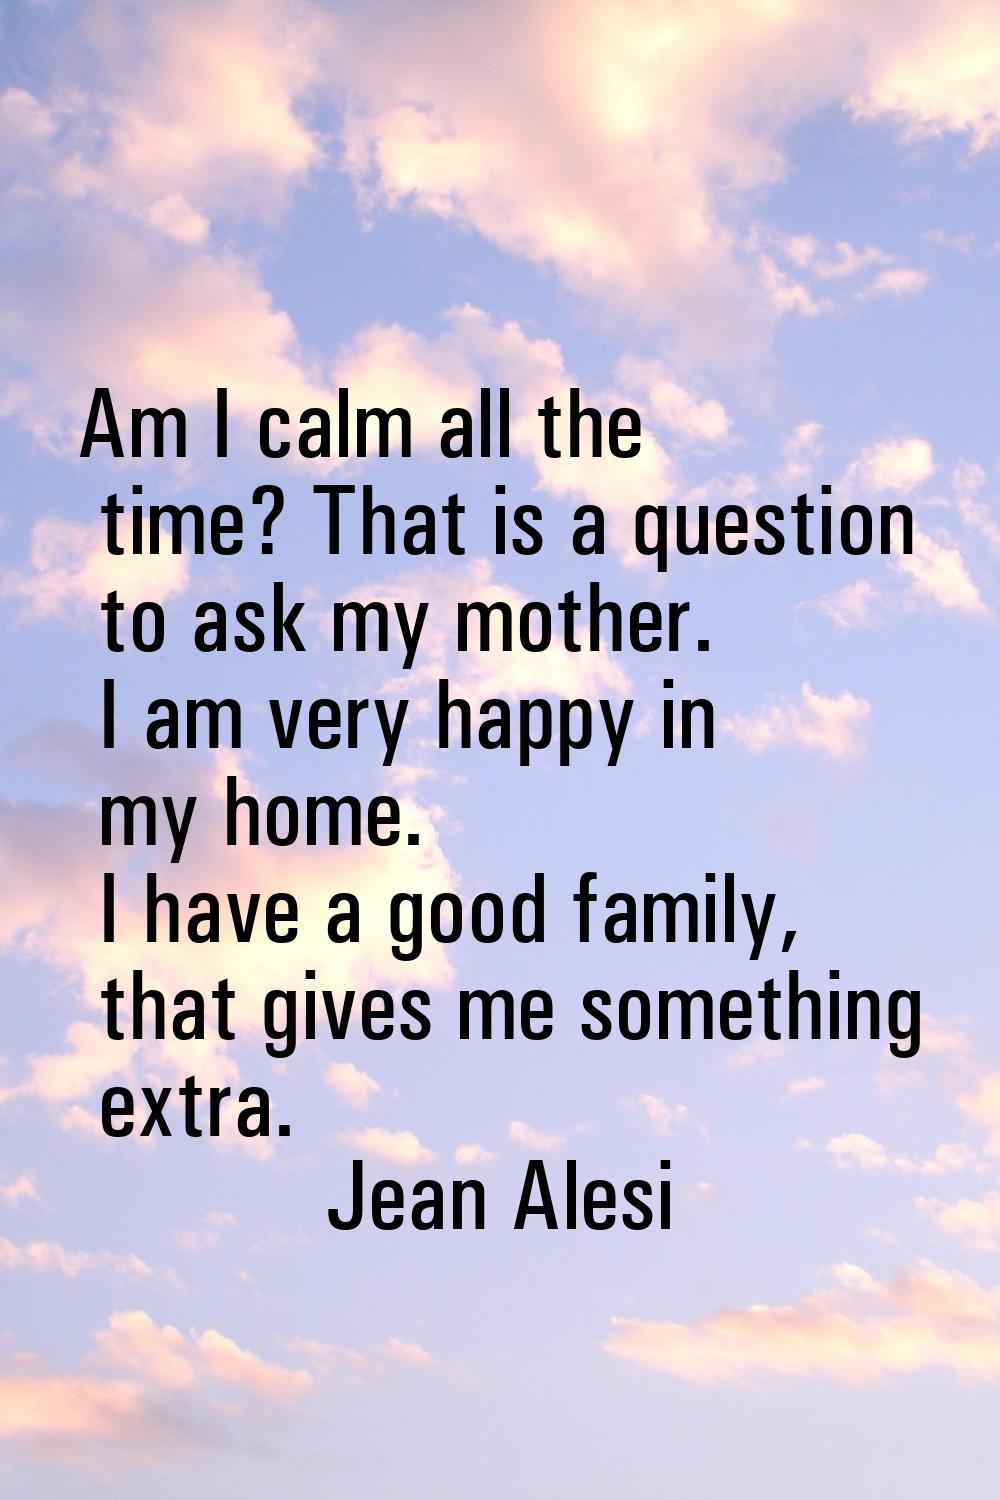 Am I calm all the time? That is a question to ask my mother. I am very happy in my home. I have a g